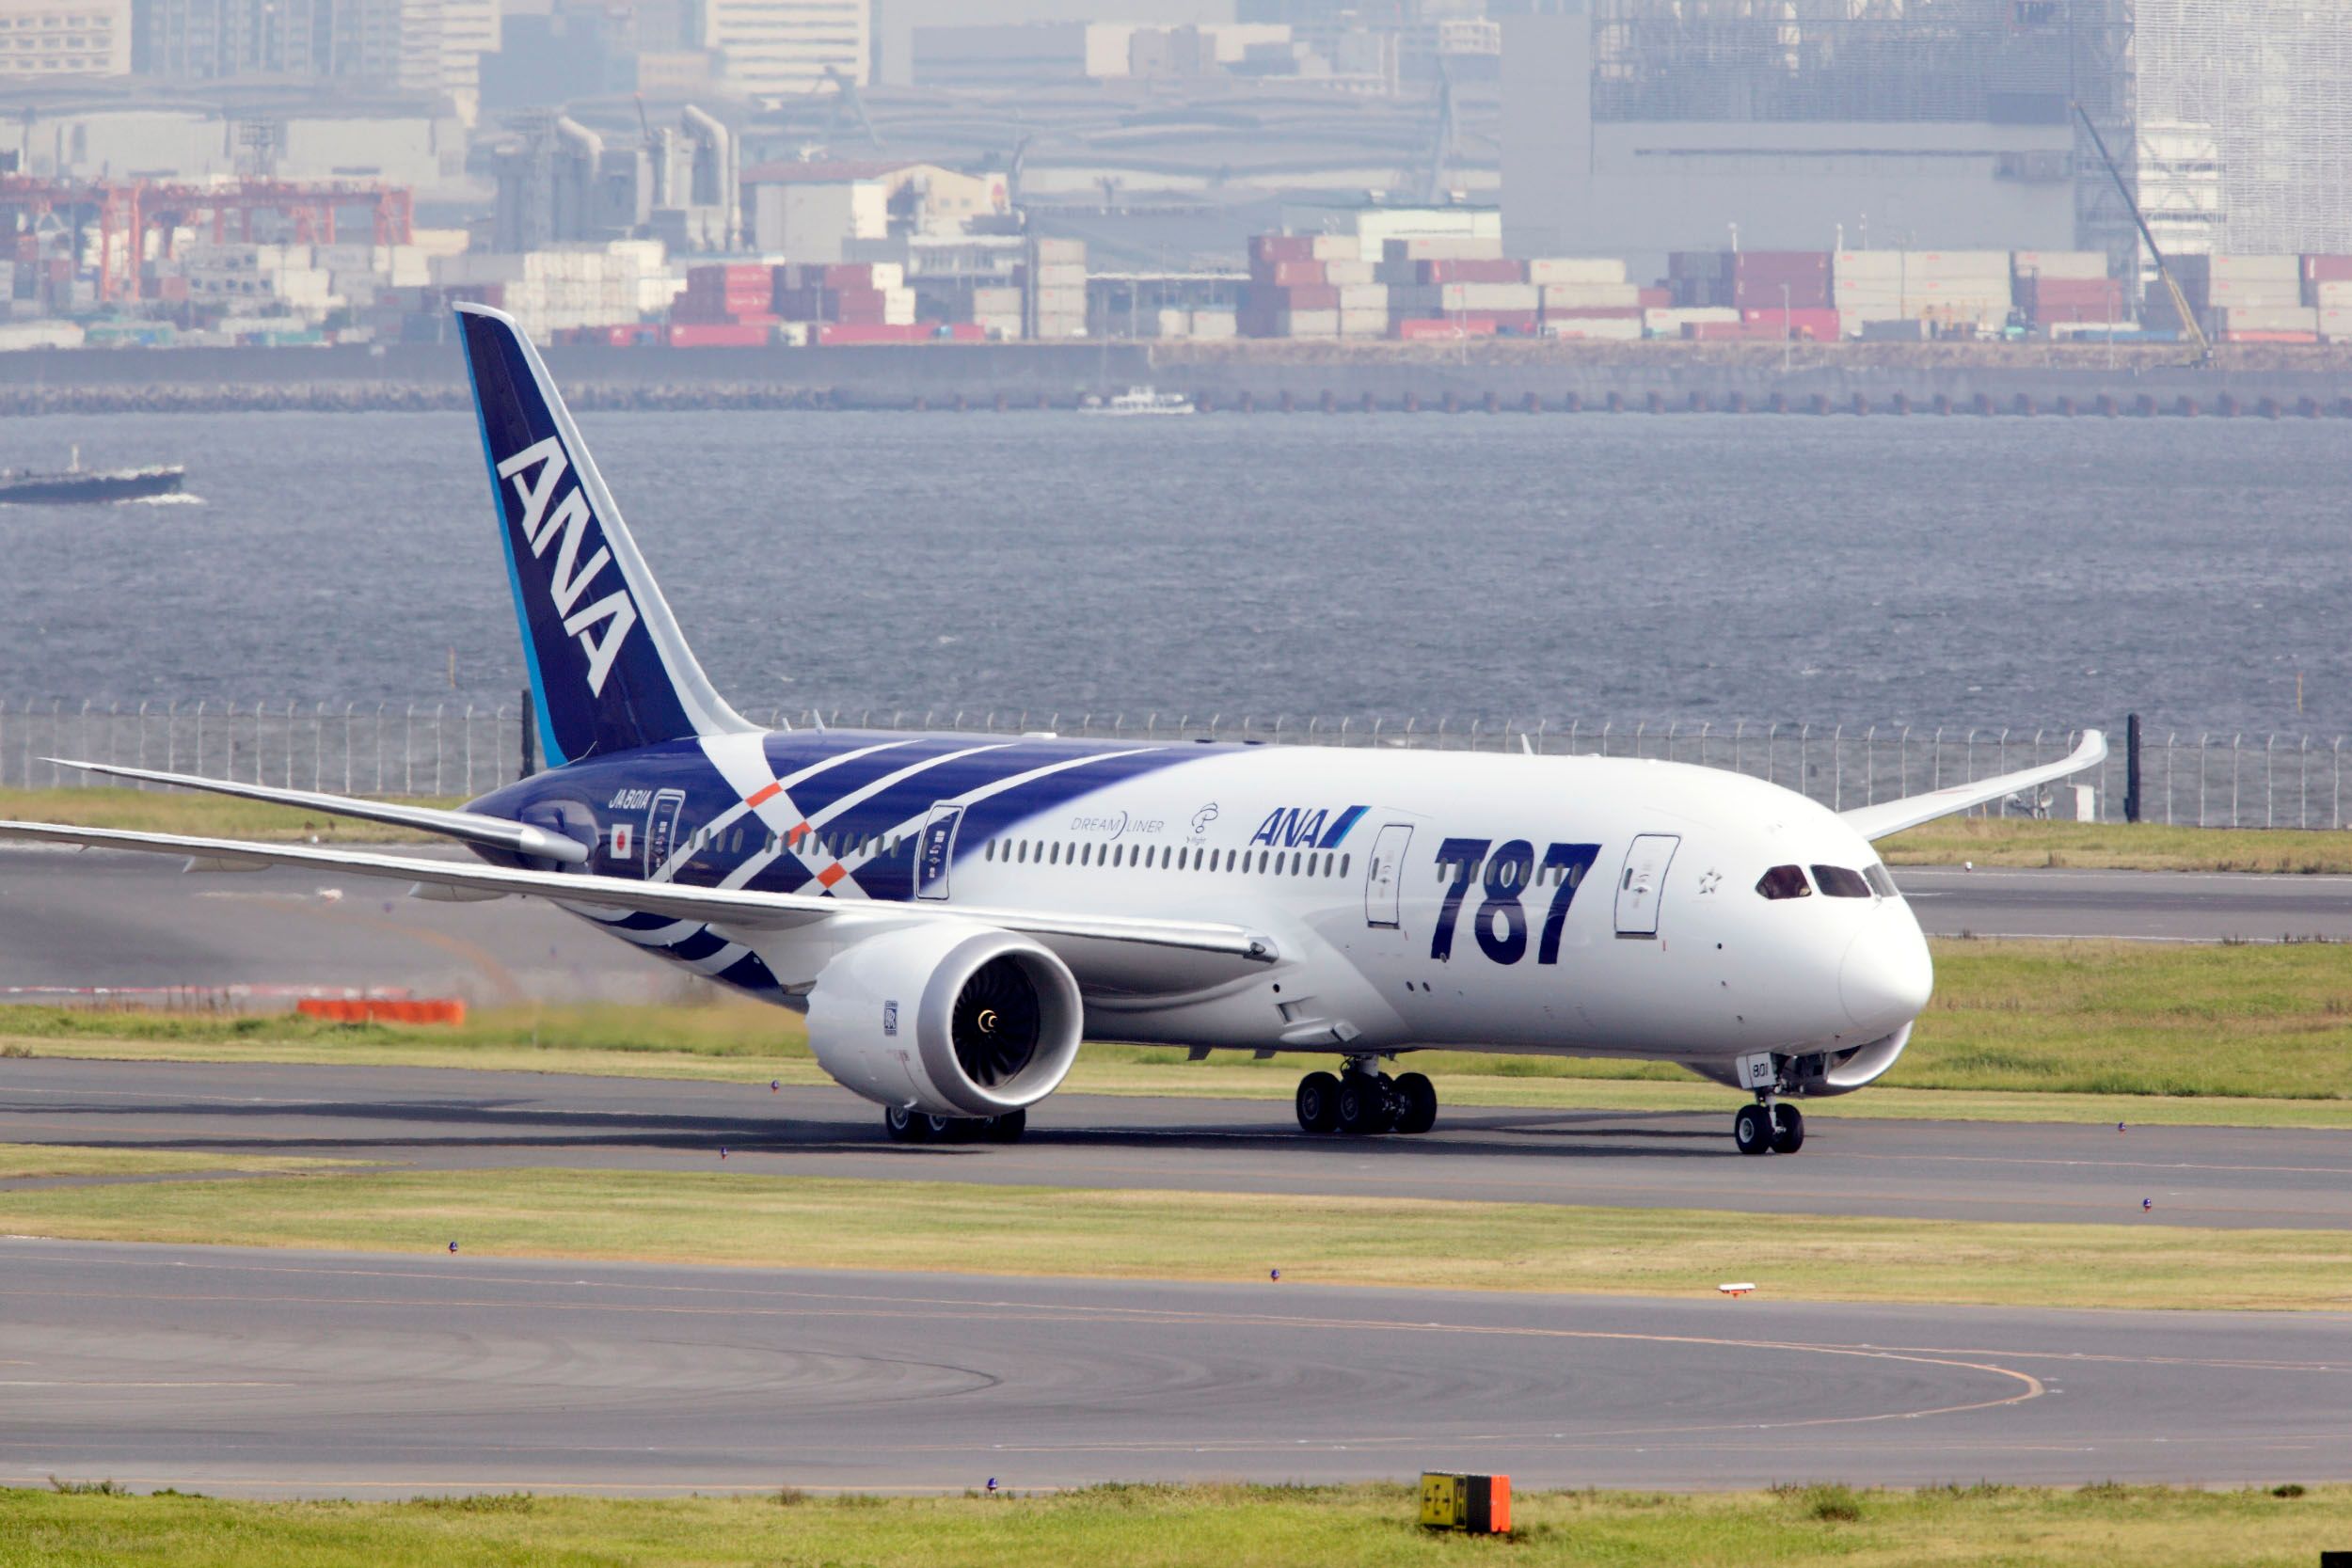 ANA first 787 arrives in Tokyo